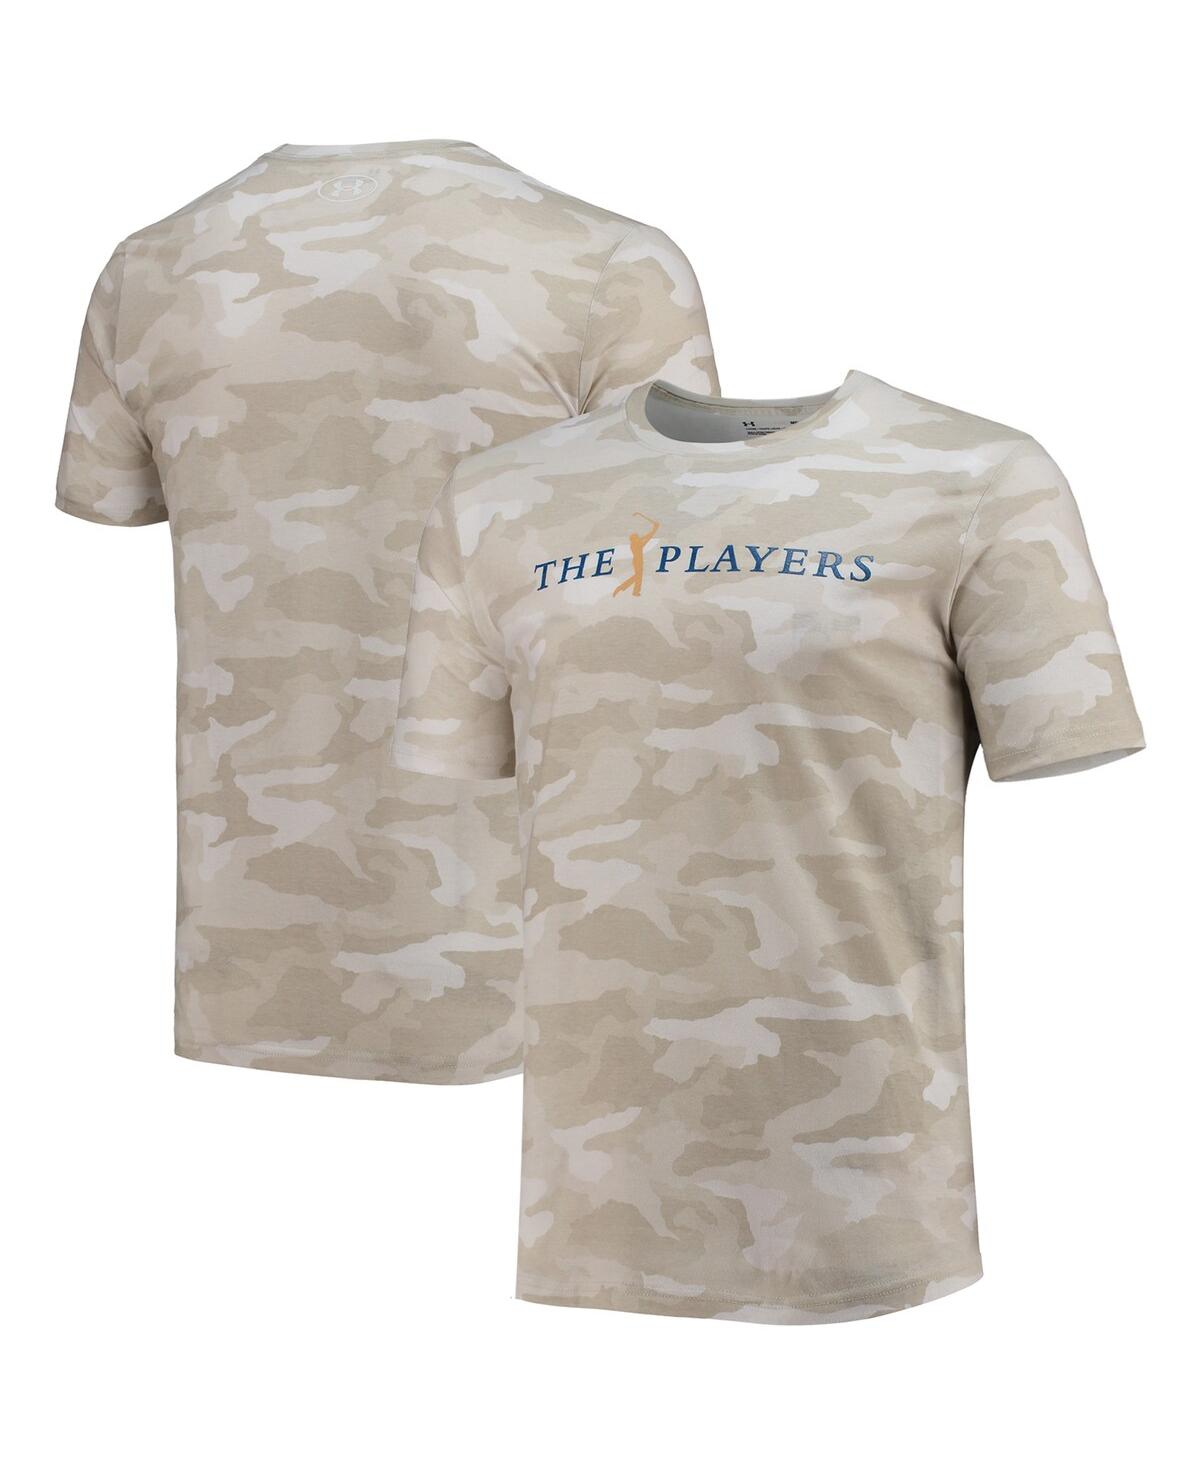 UNDER ARMOUR MEN'S UNDER ARMOUR WHITE THE PLAYERS ALL DAY T-SHIRT